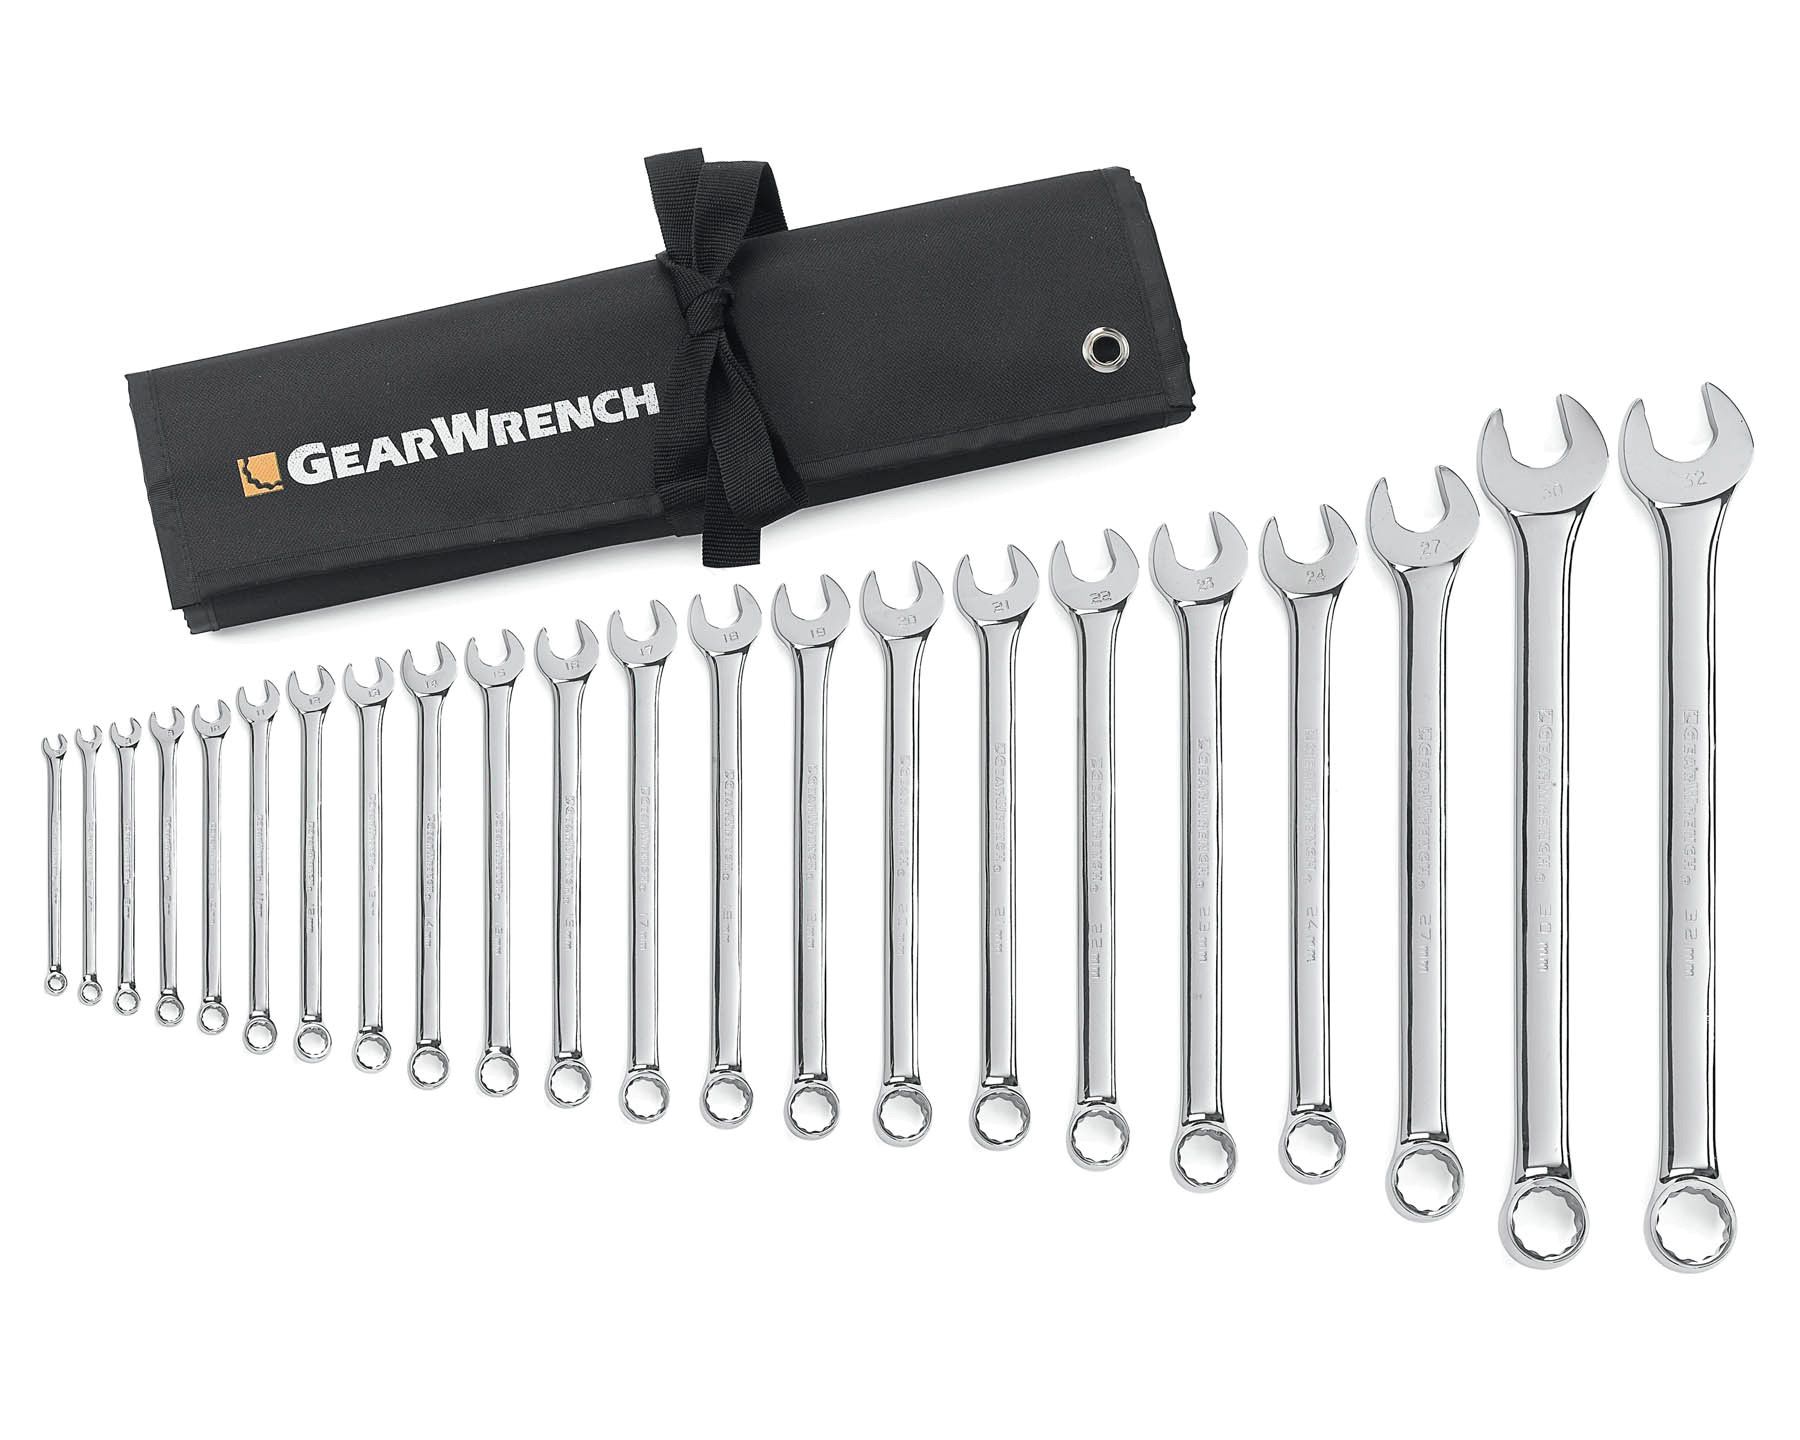 GearWrench 22-piece Long Pattern Metric Combination Wrench Set